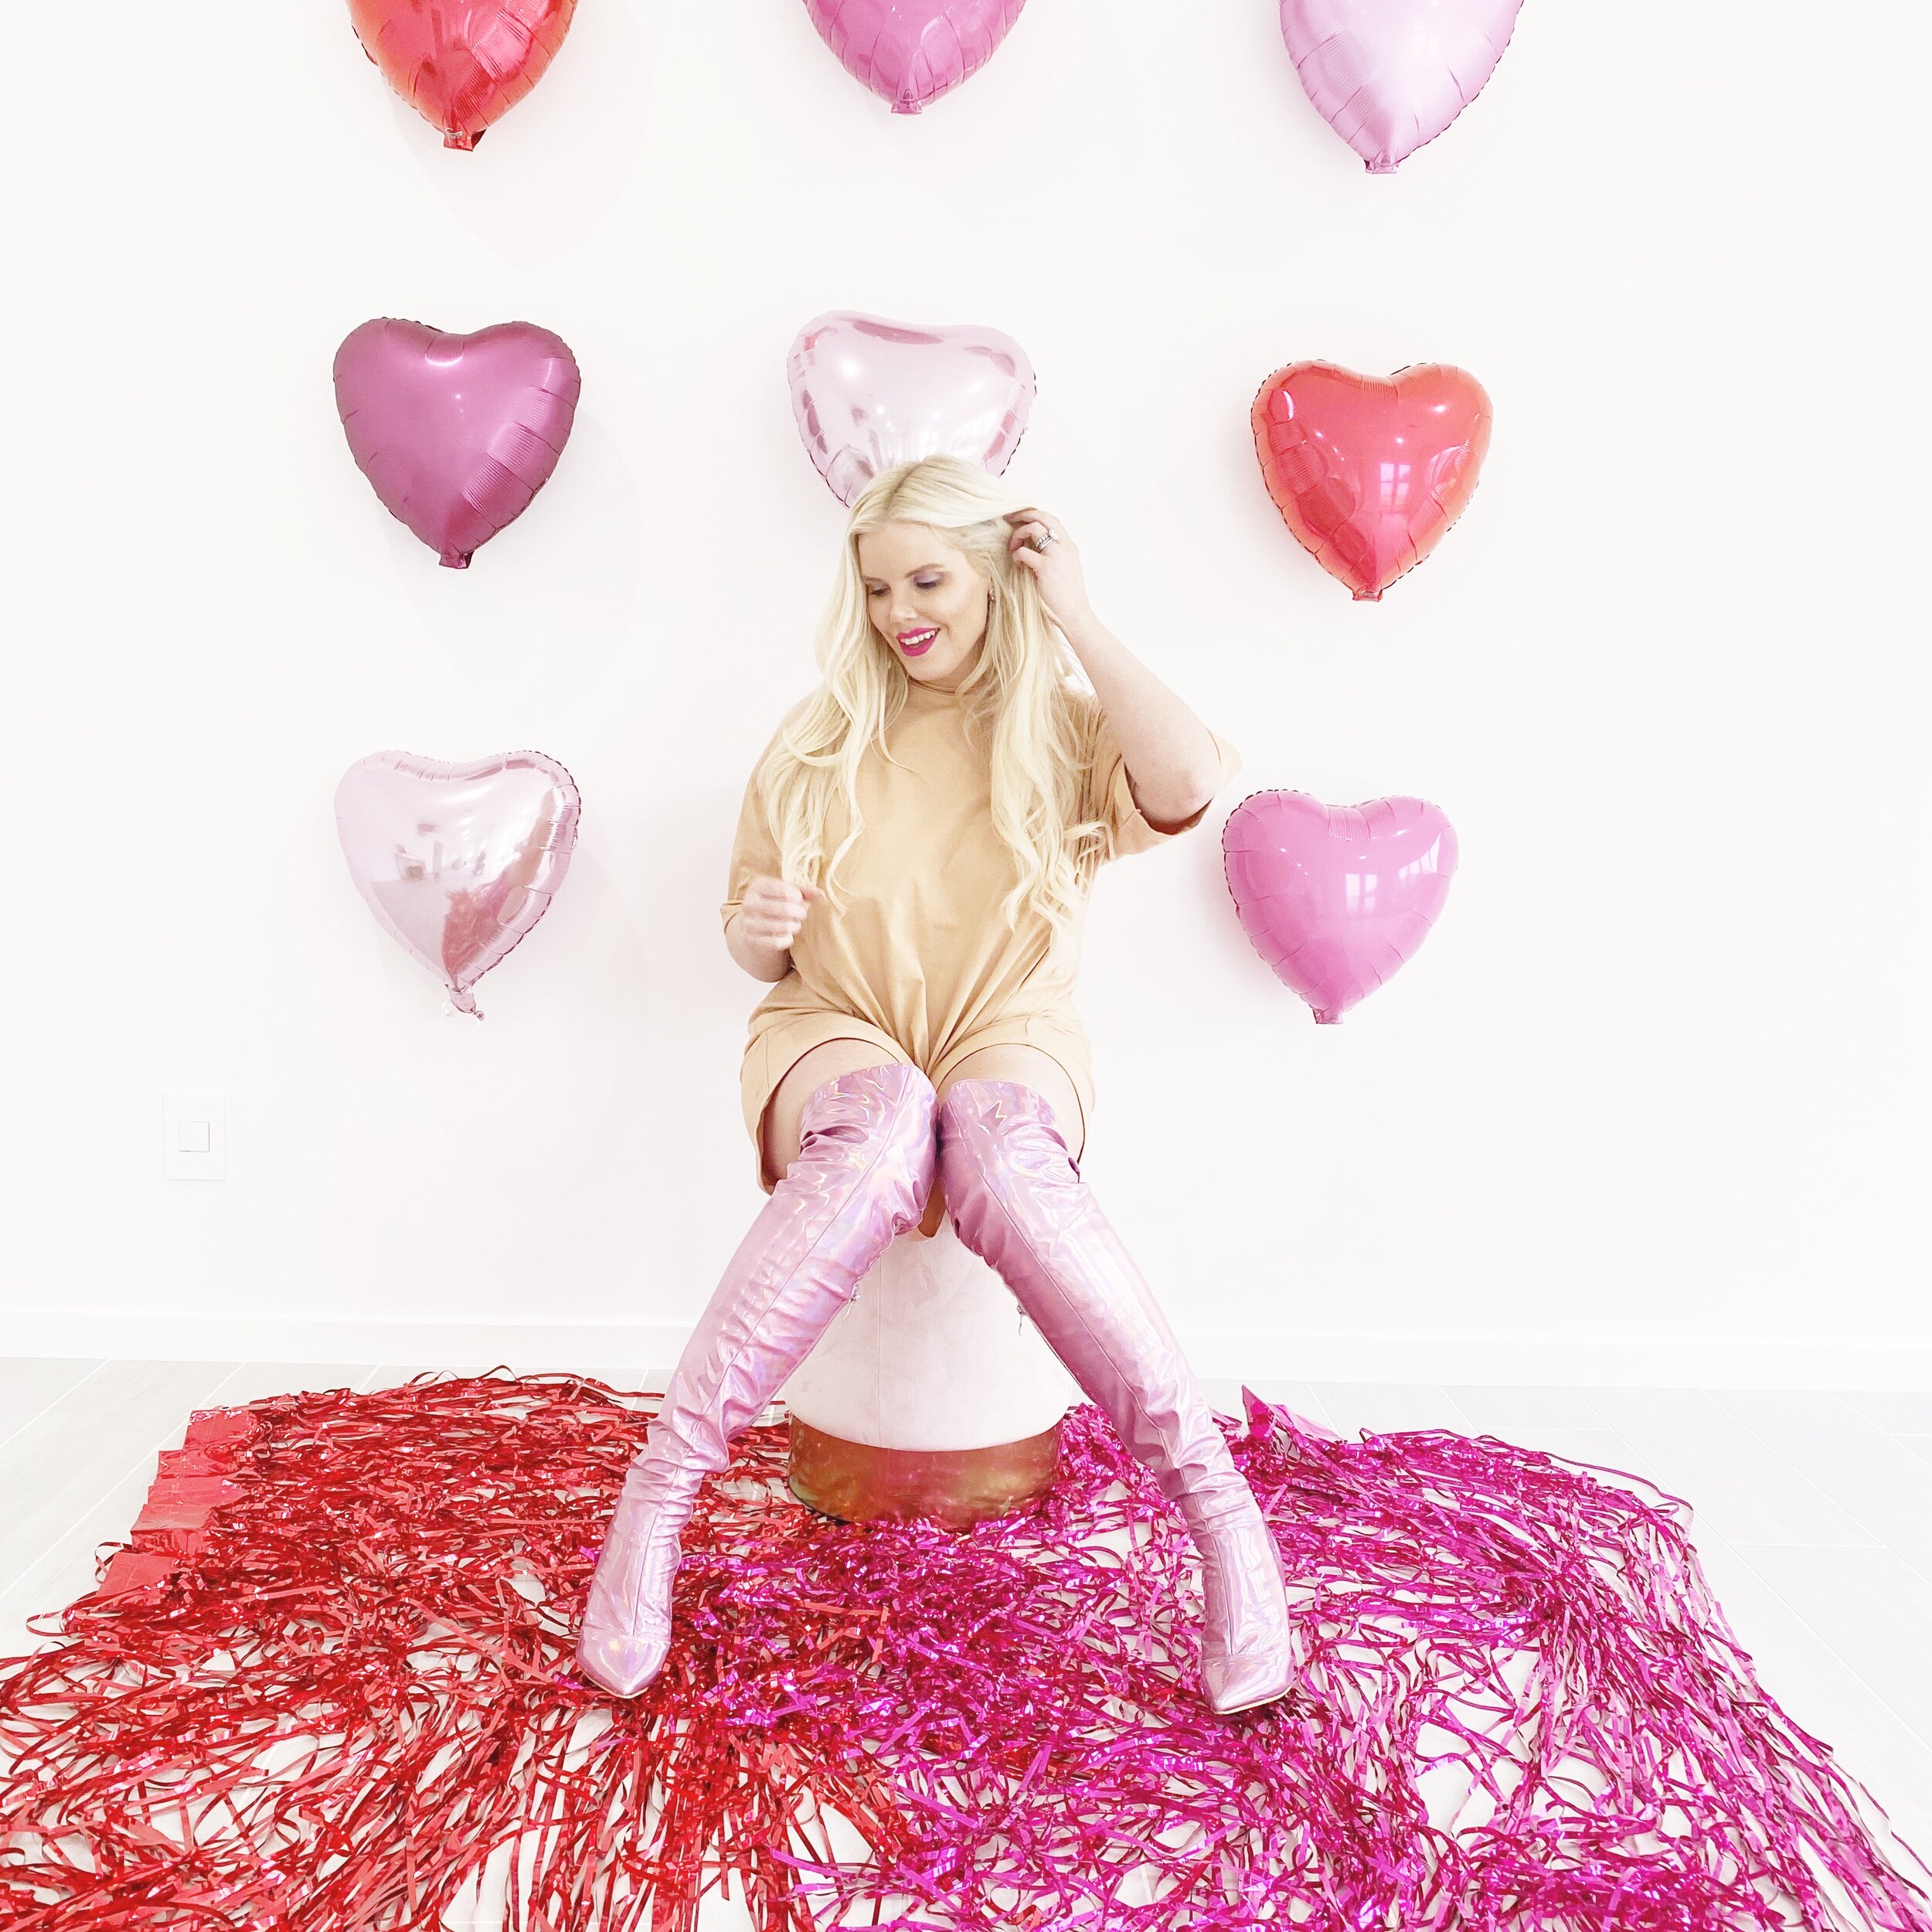 The-Caroline-Doll-Blog-Valentines-Day-Give-Love-Pink-Hearts-Balloons-Pretty-Little-Thing-1.JPG